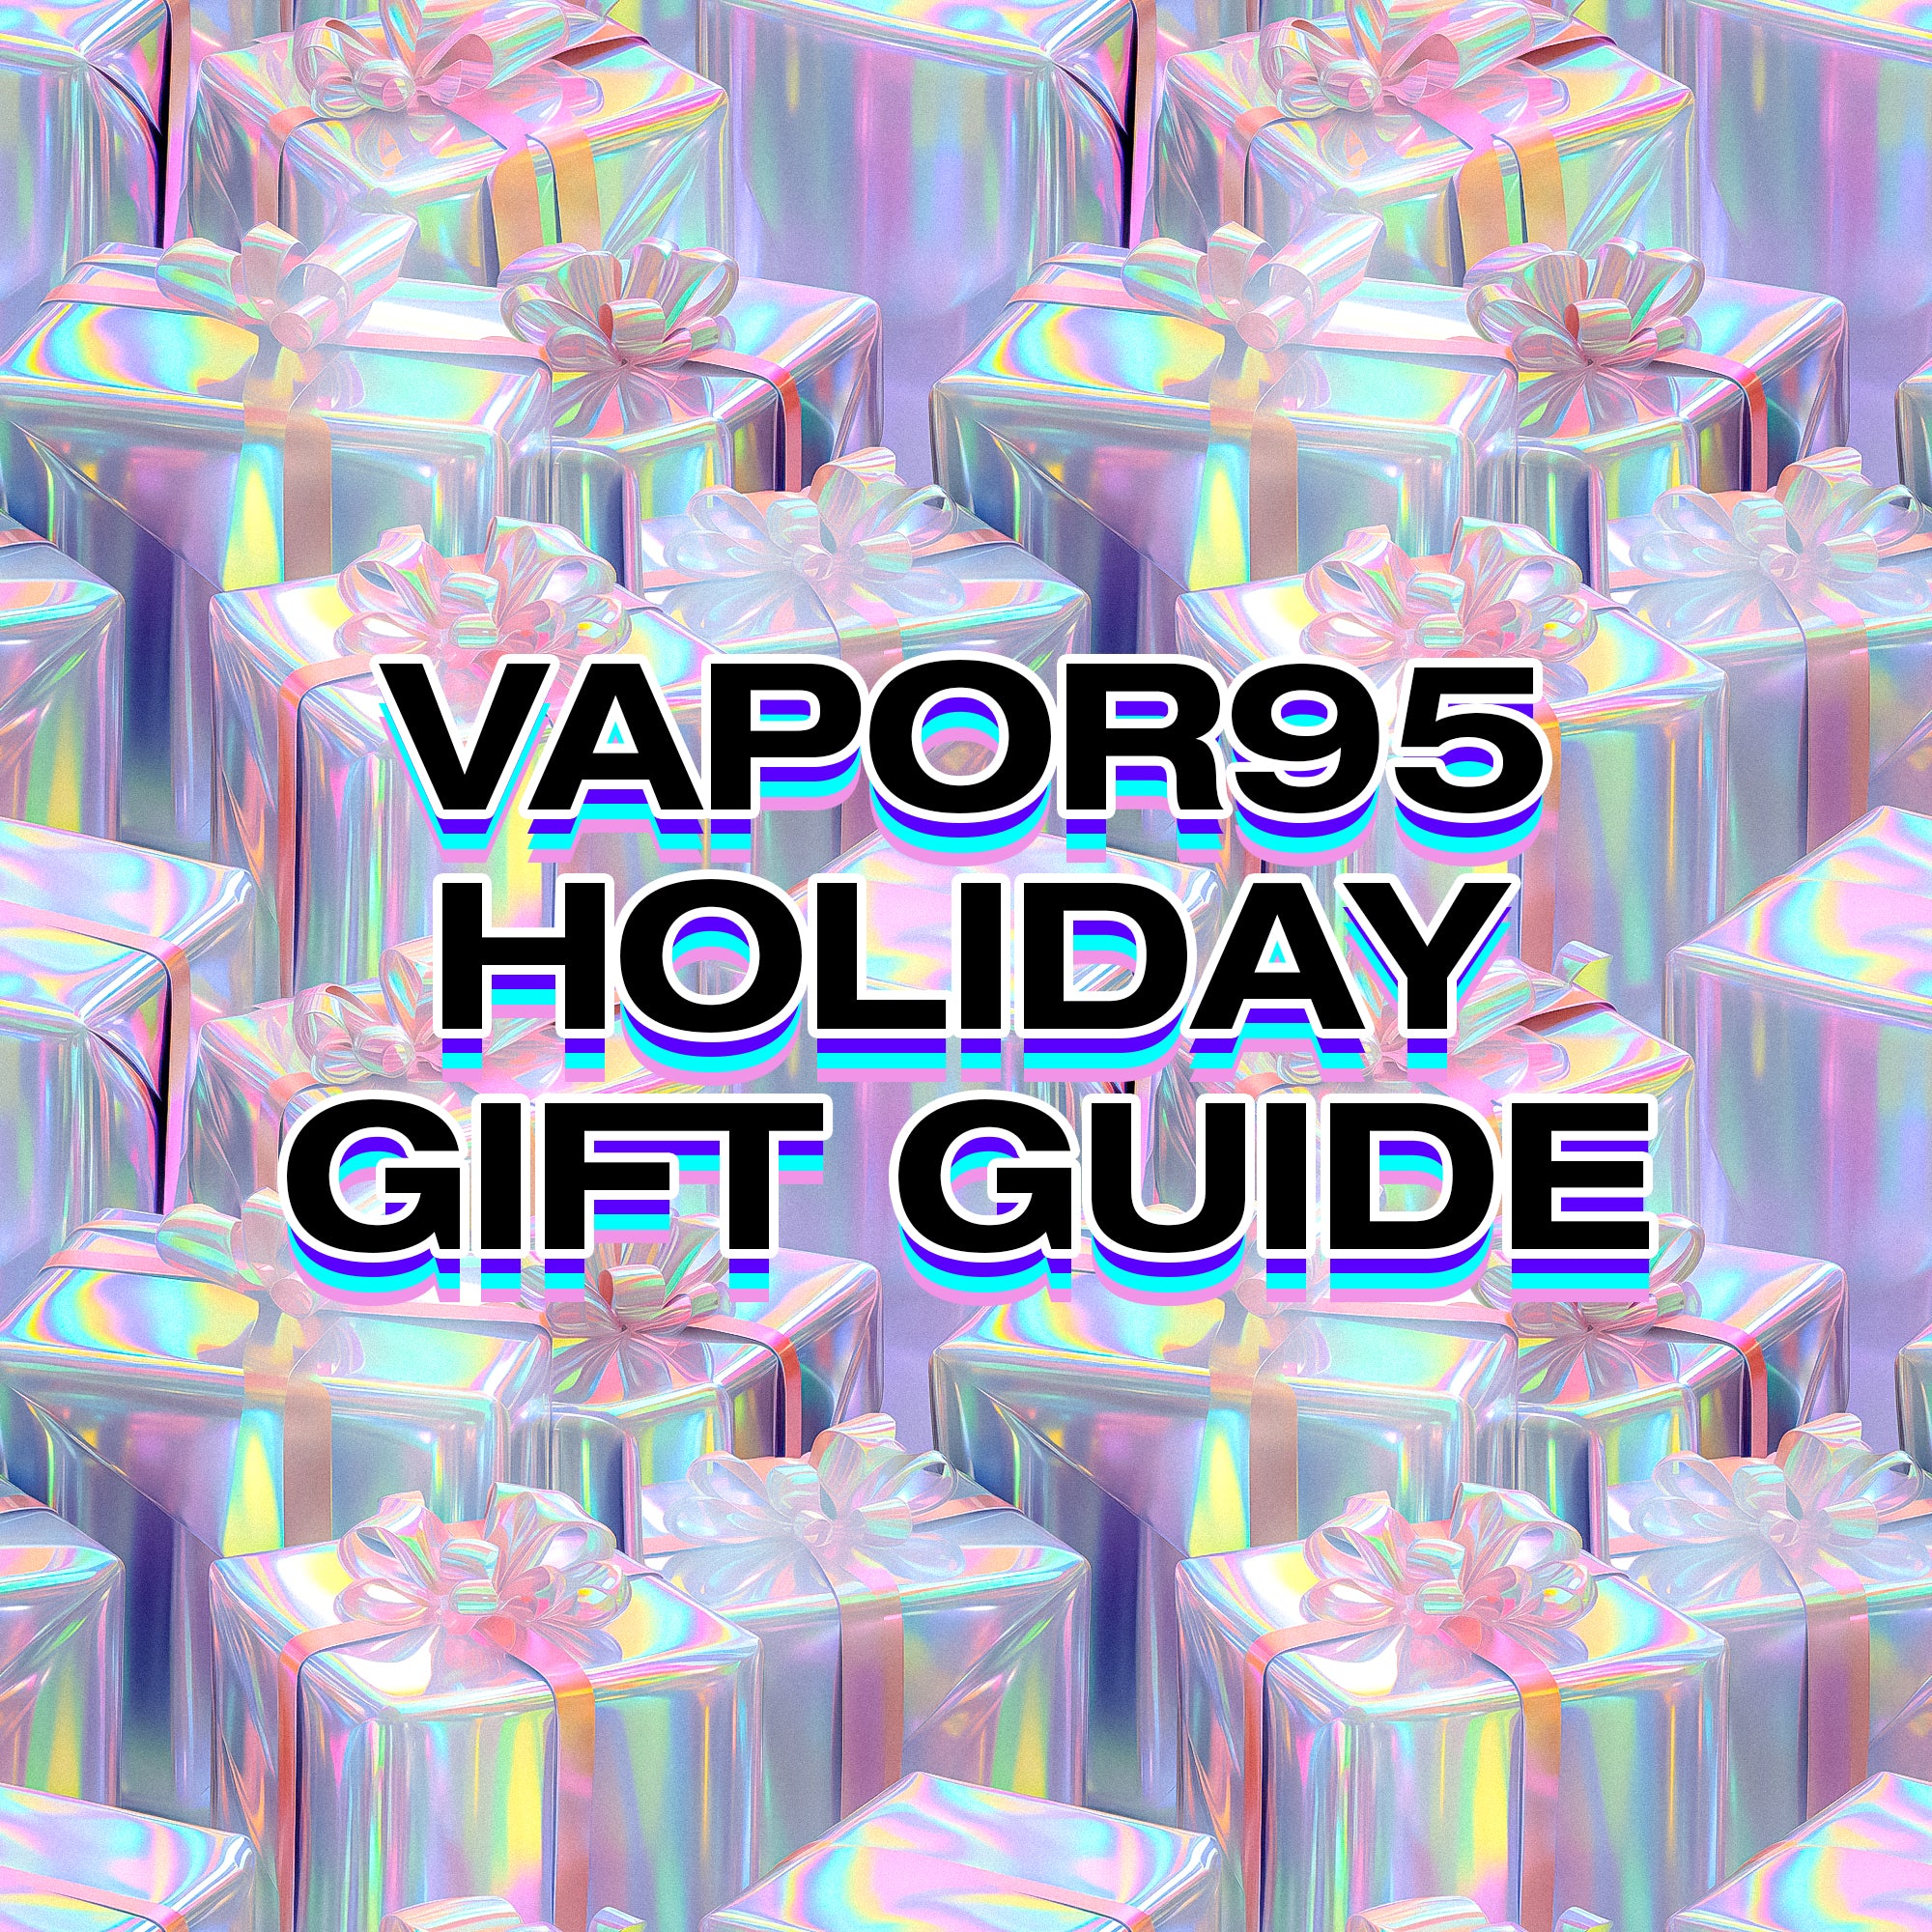 The Ultimate Christmas Gift Guide: 10 Of Our Favorite Picks From Vapor95.com